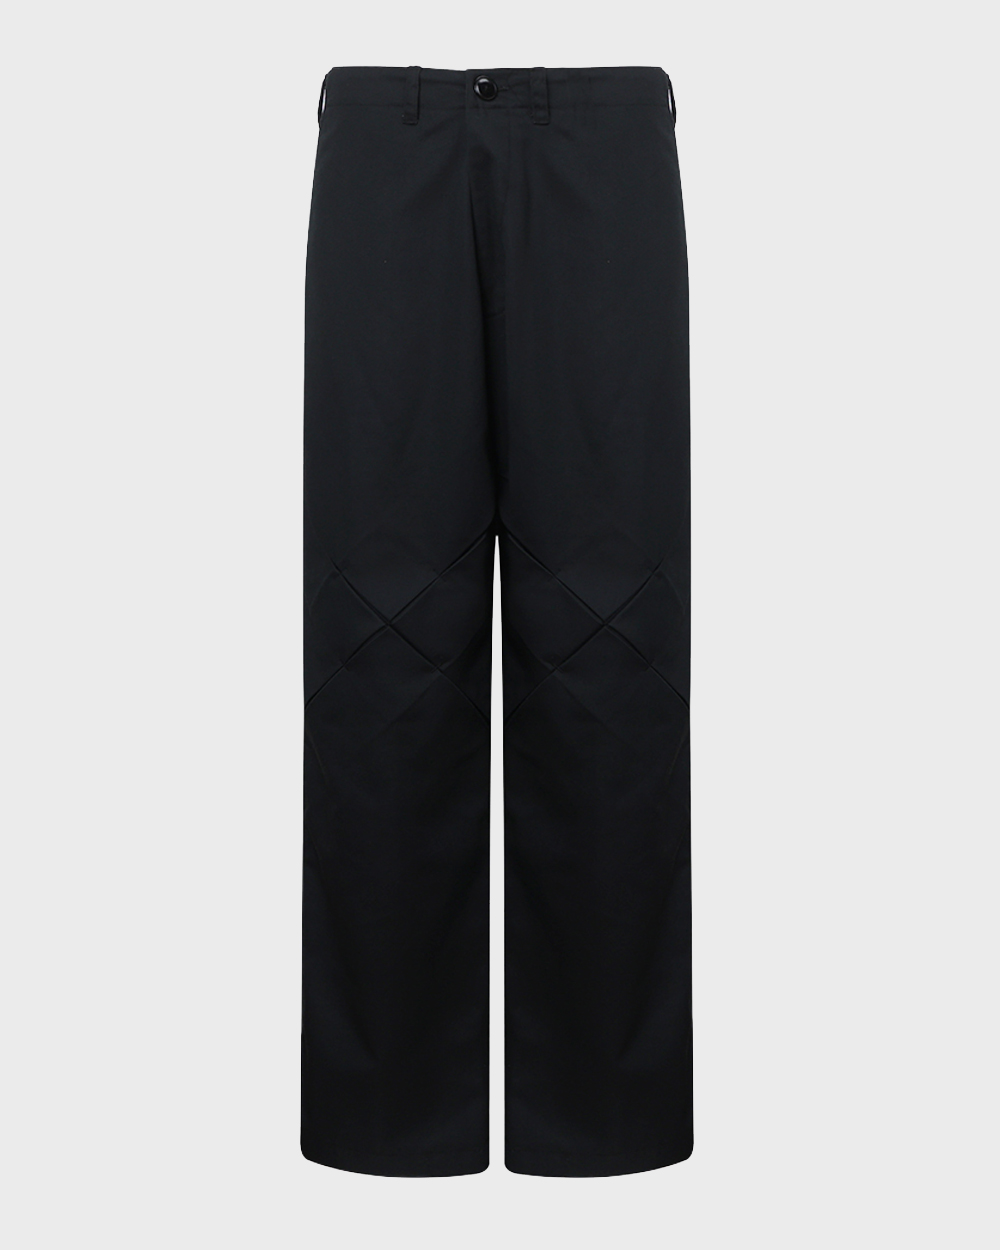 X French Work Trousers (Black)